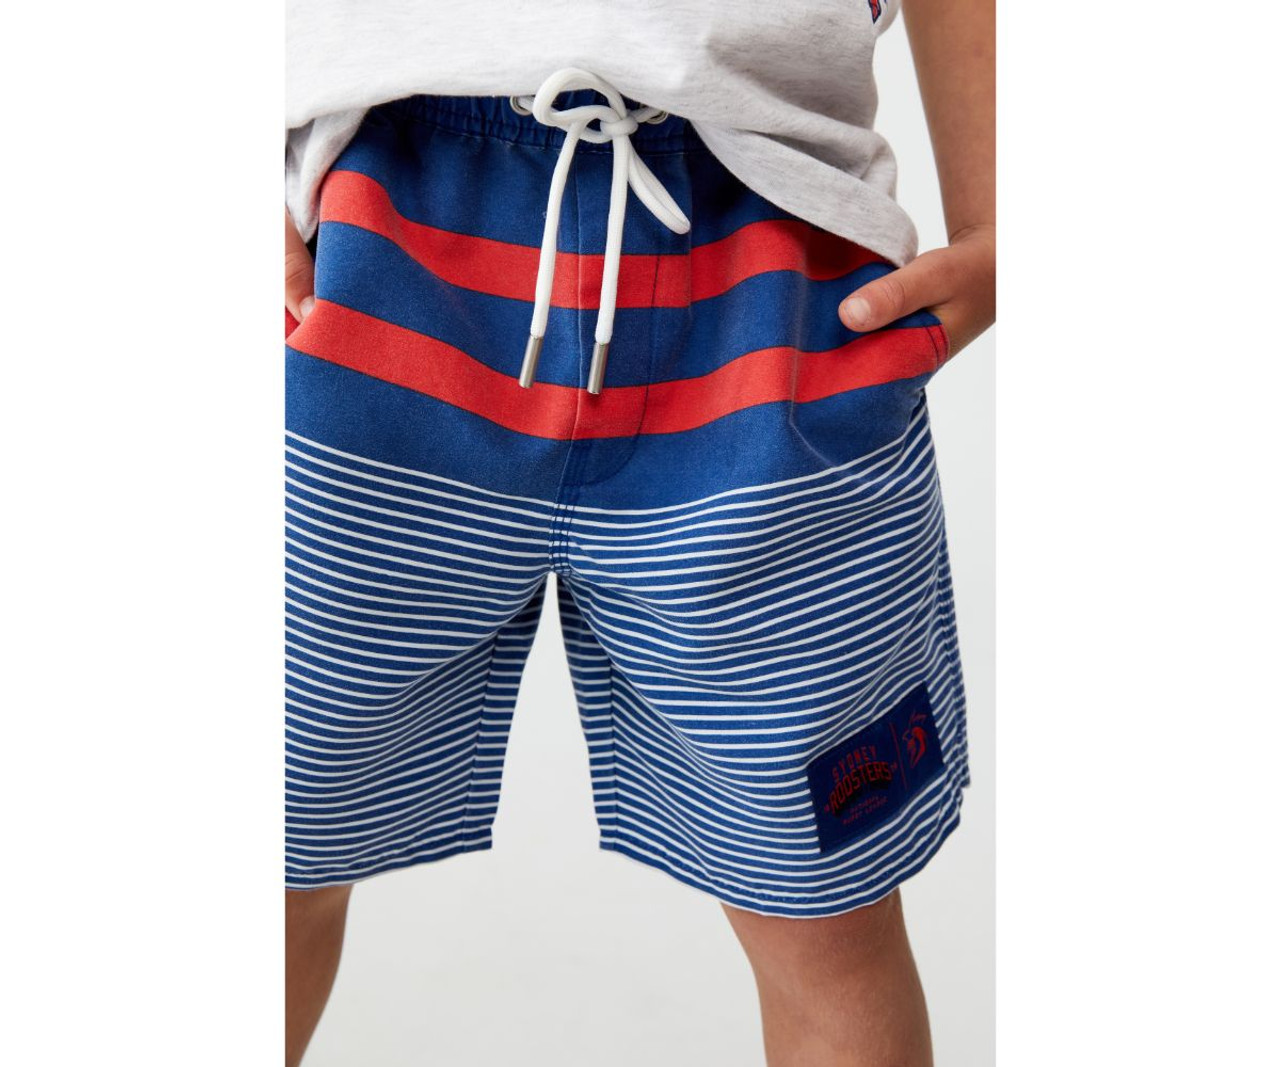 Sydney Roosters 2022 CottonOn Kids Club Boardshort - Roosters Shop